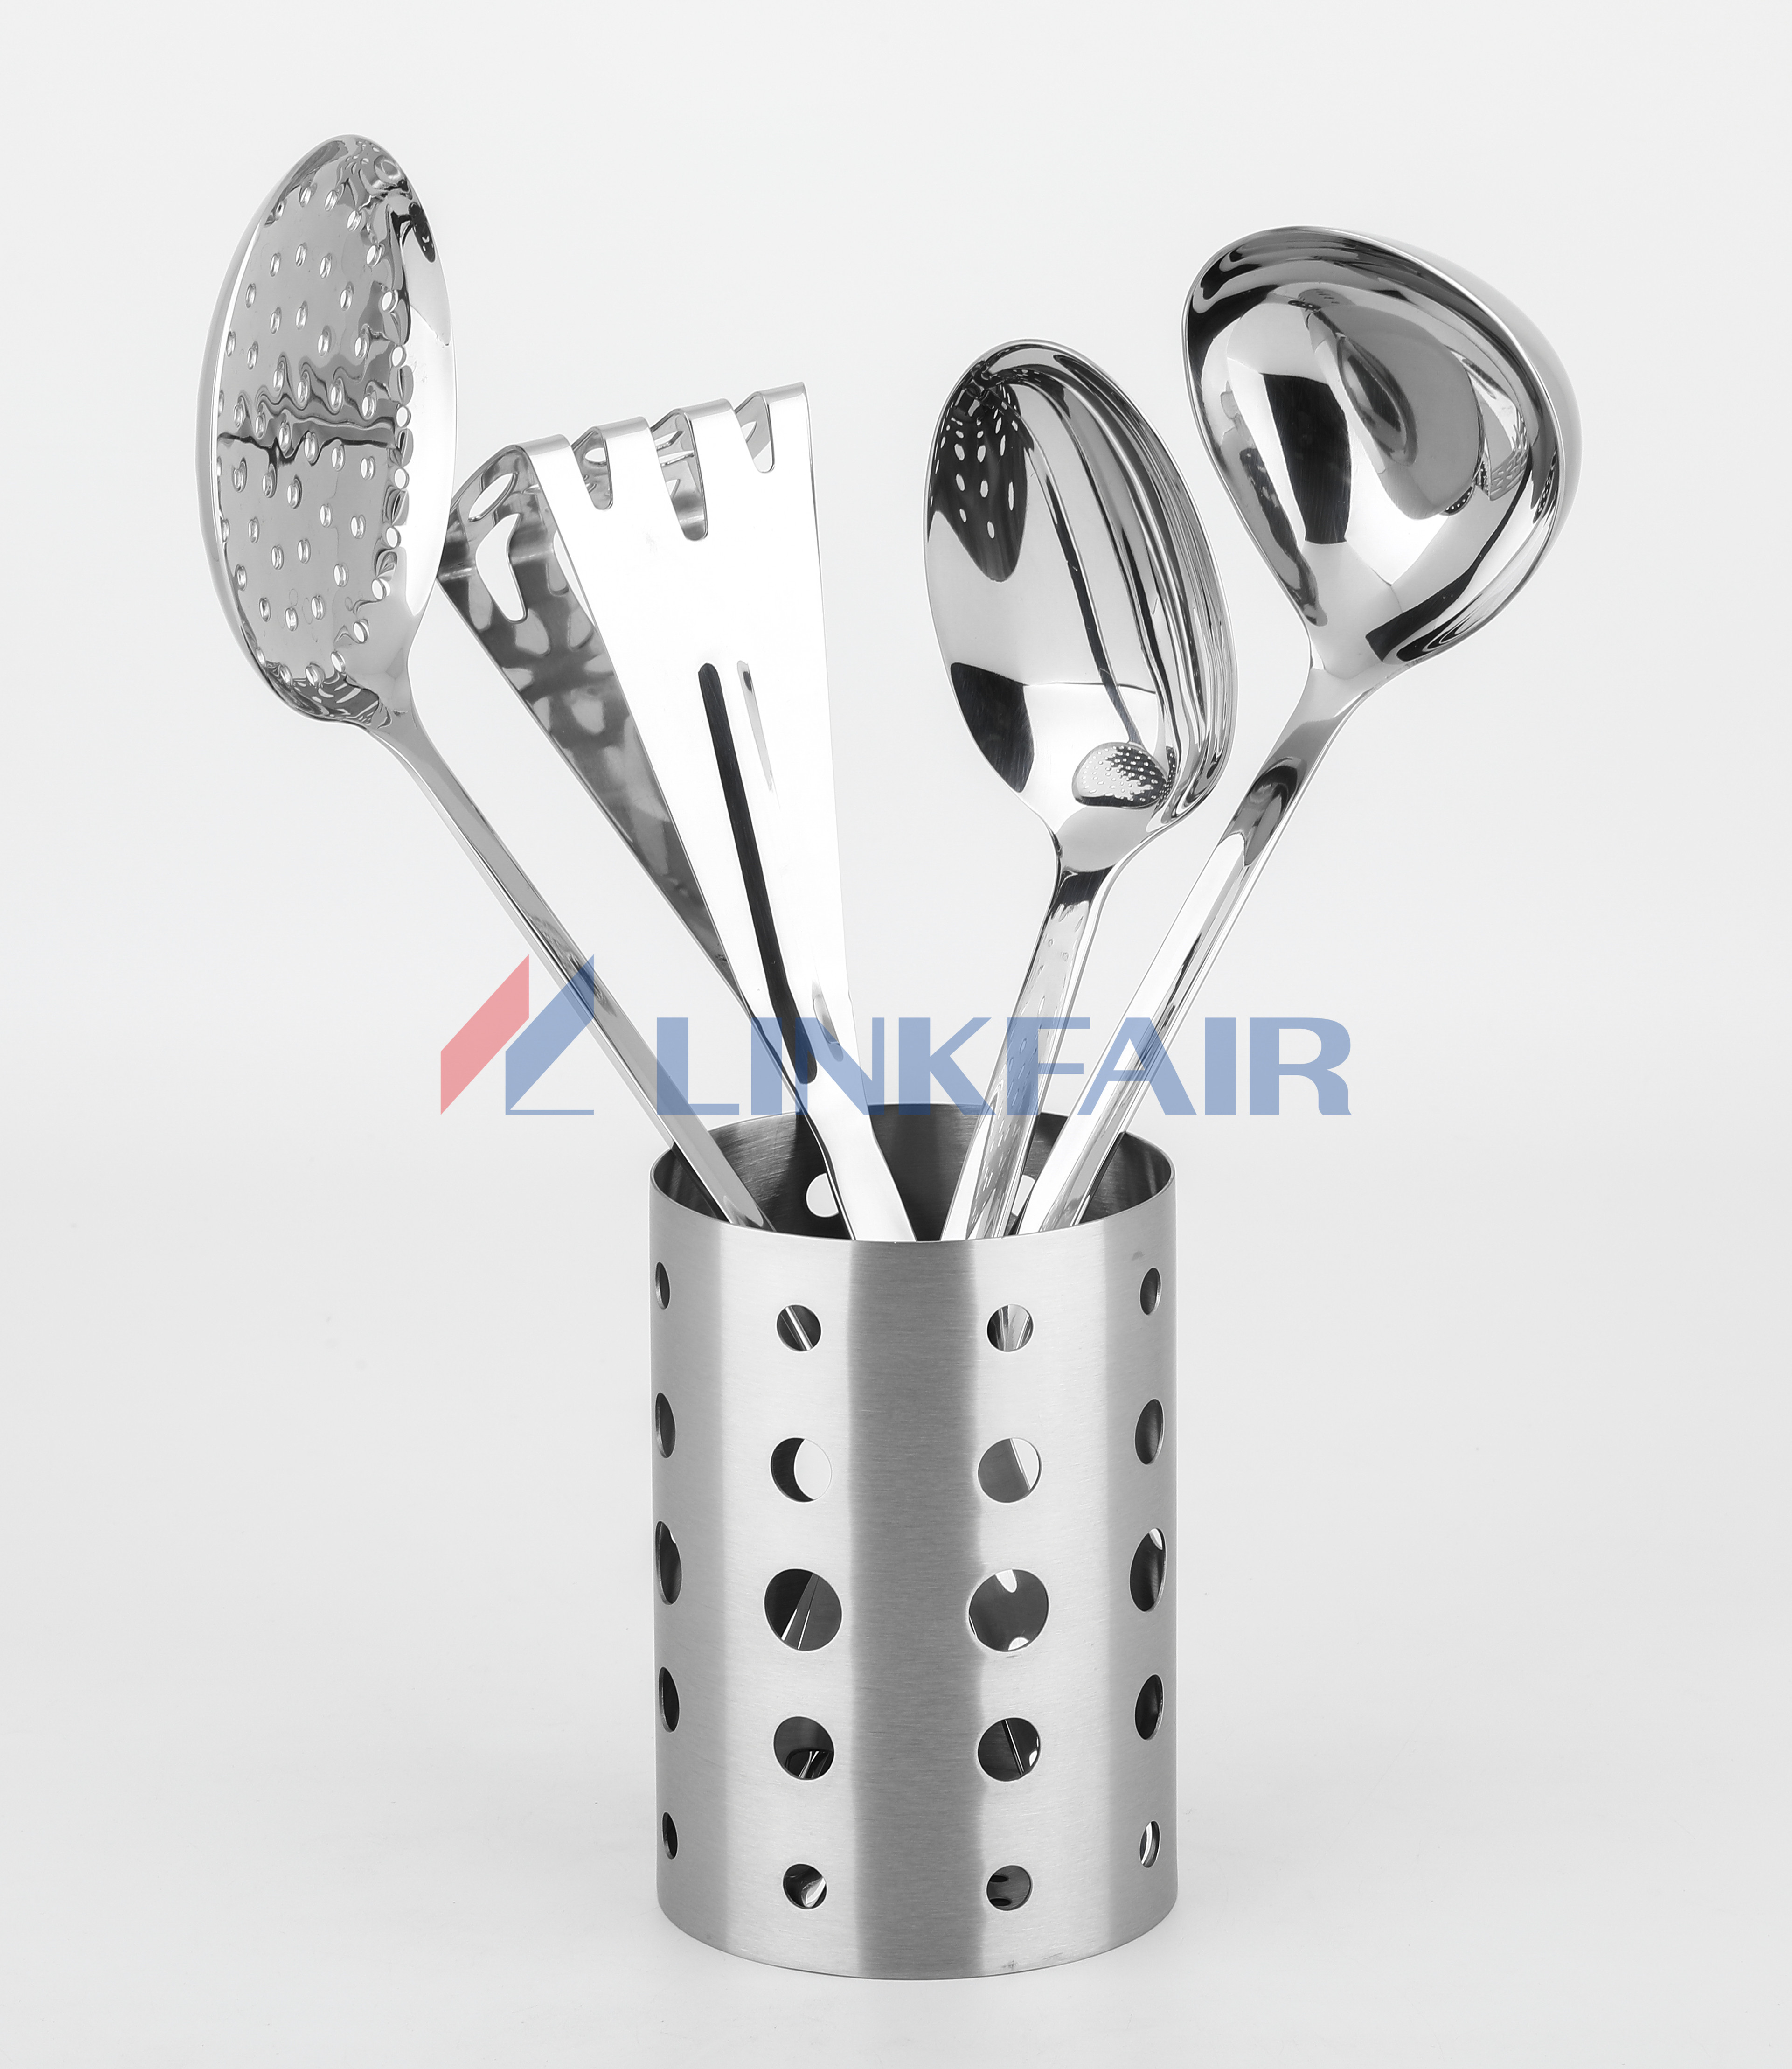 7-piece Utensils with Cup Holder